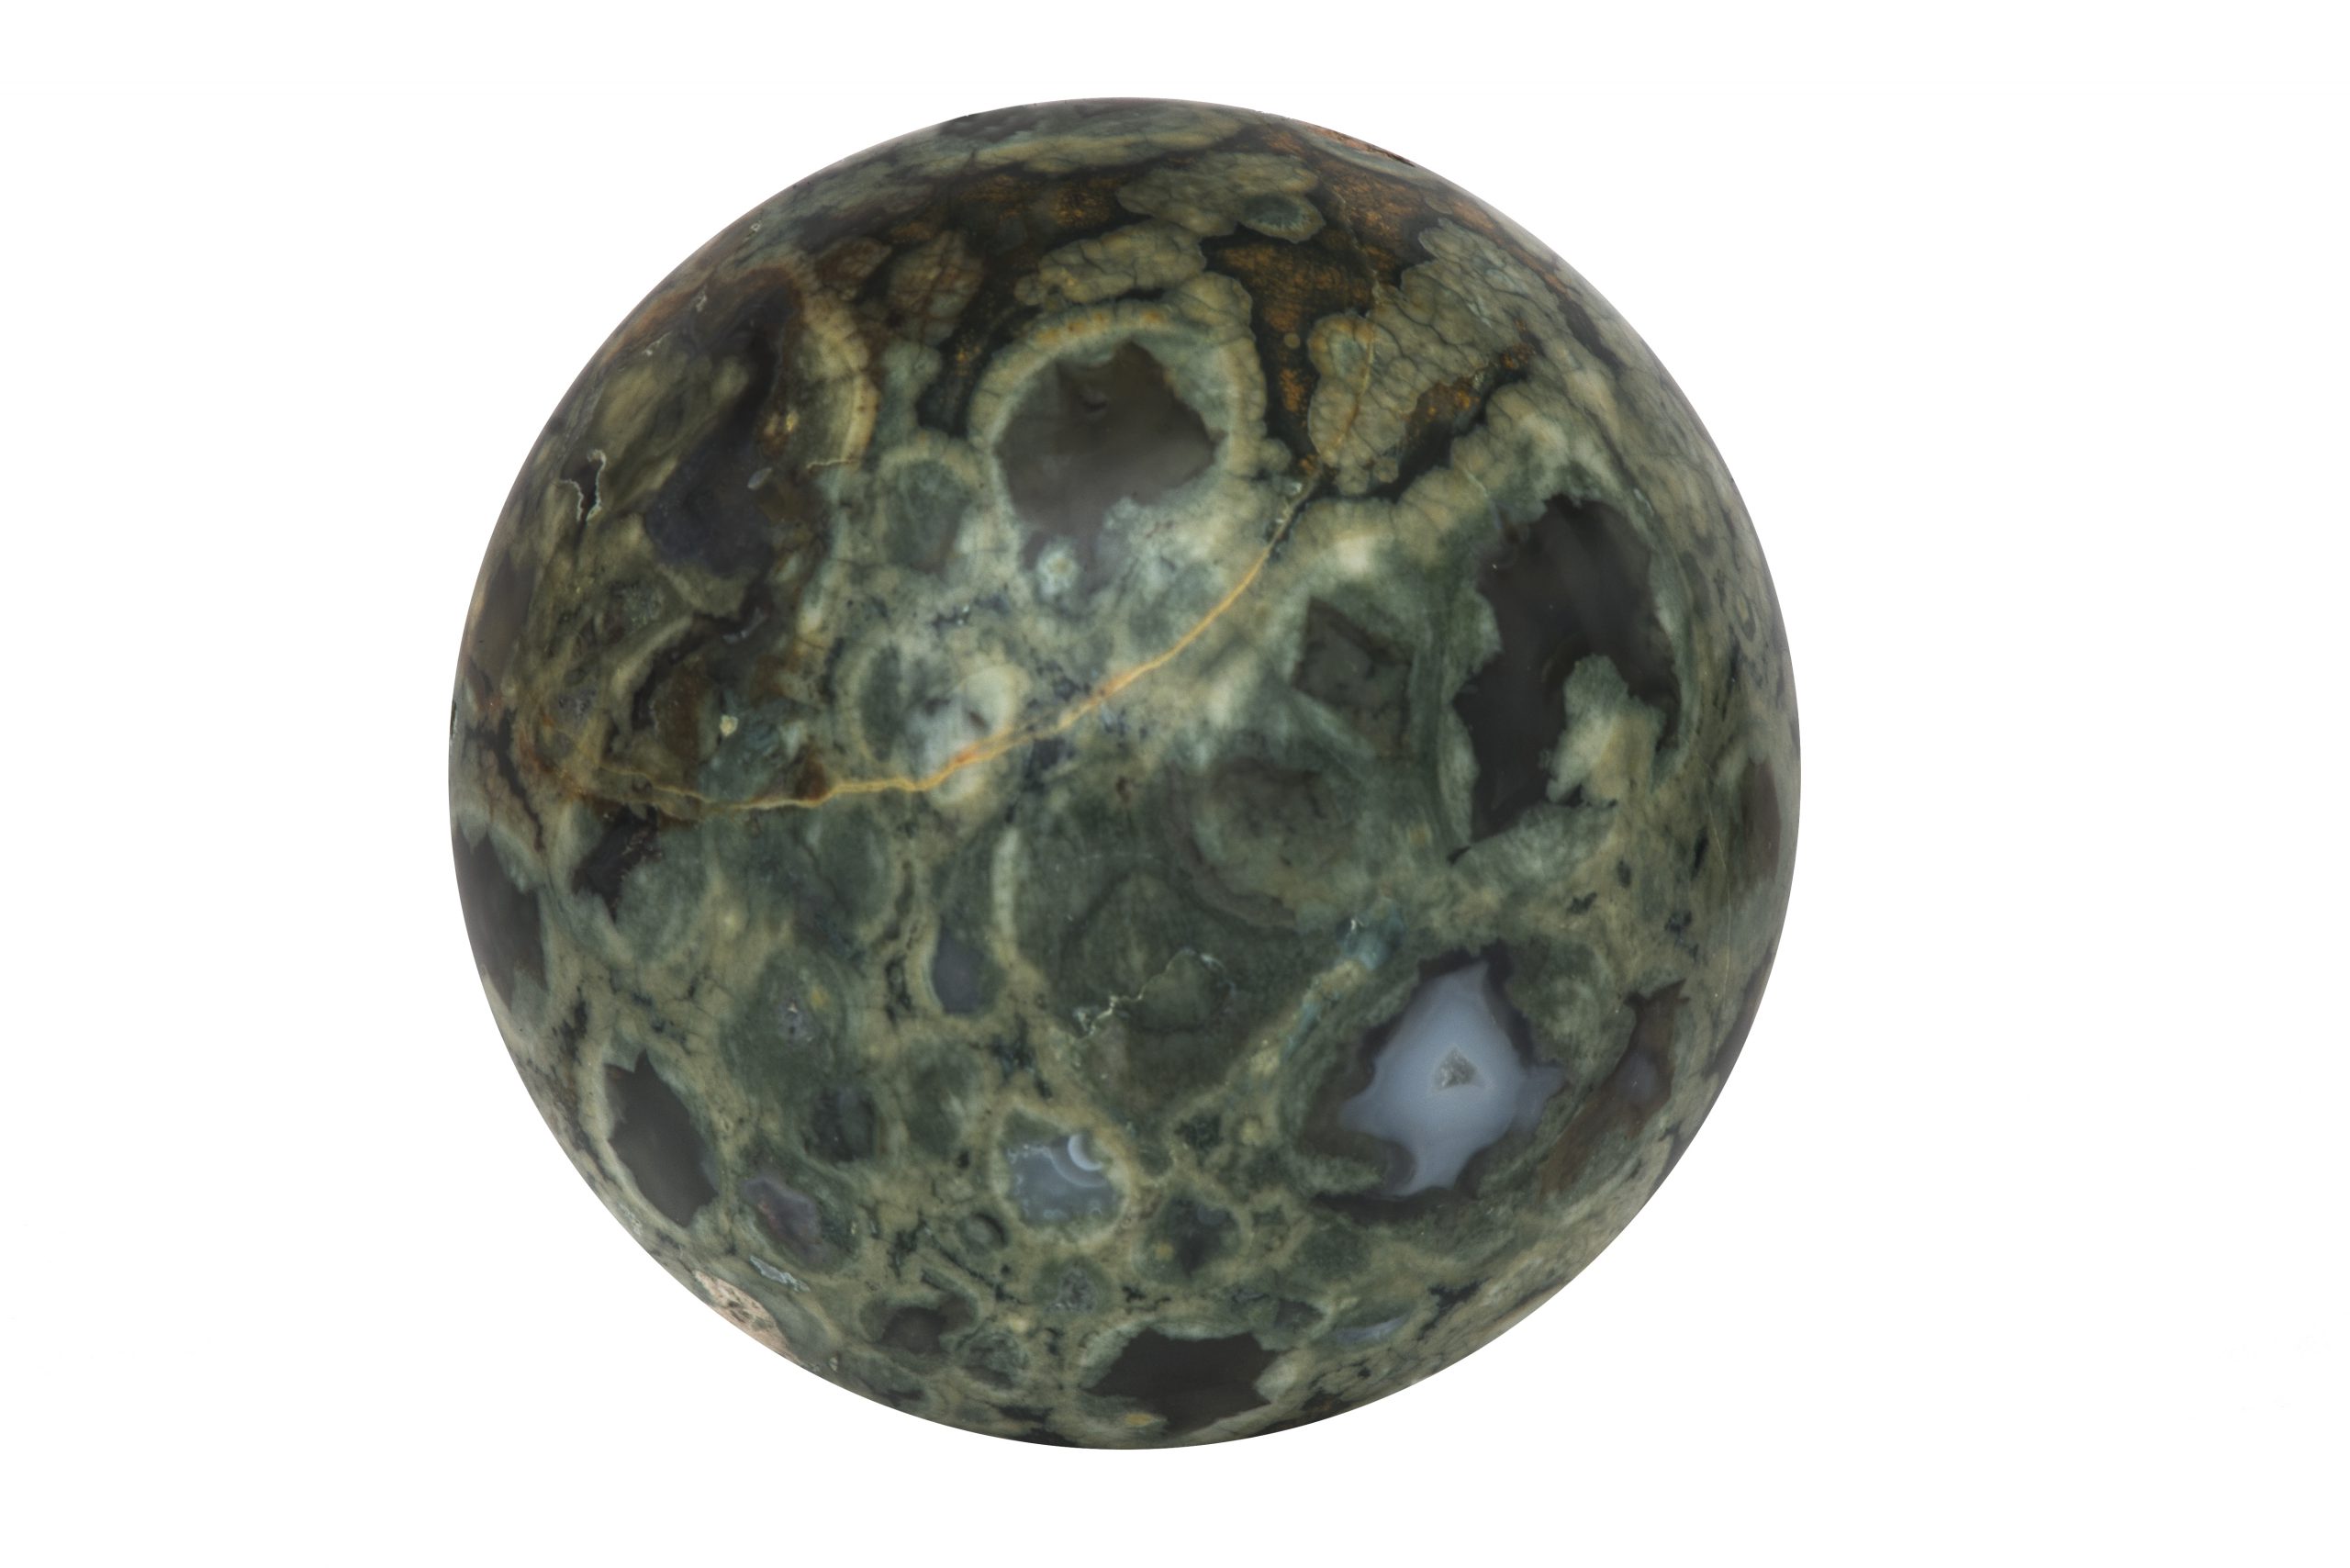 sphere of speckled green stone